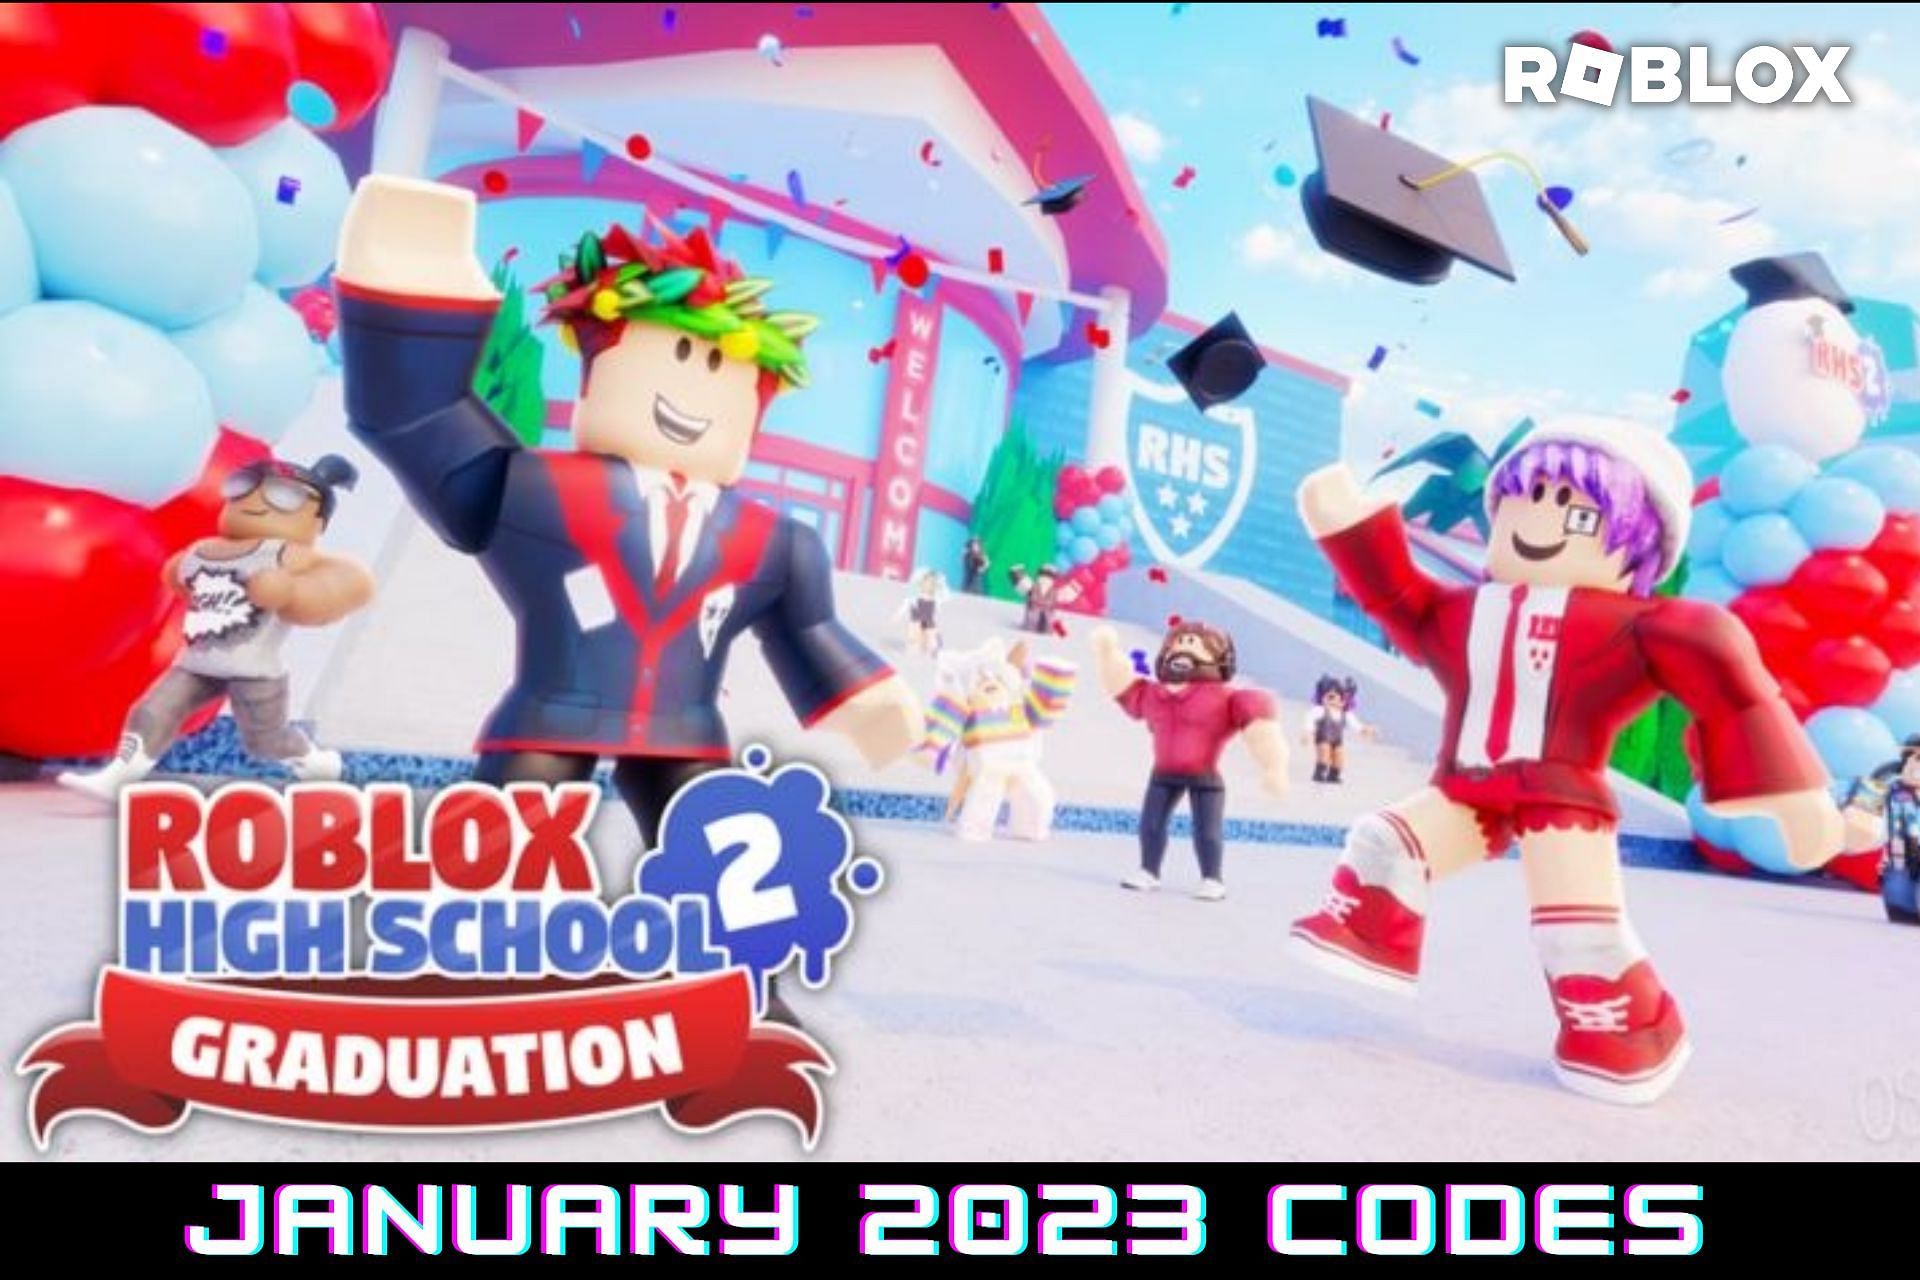 12 CODES] *FREE GEMS* ALL WORKING IN ANIME STORY JANUARY 2023! Roblox. 